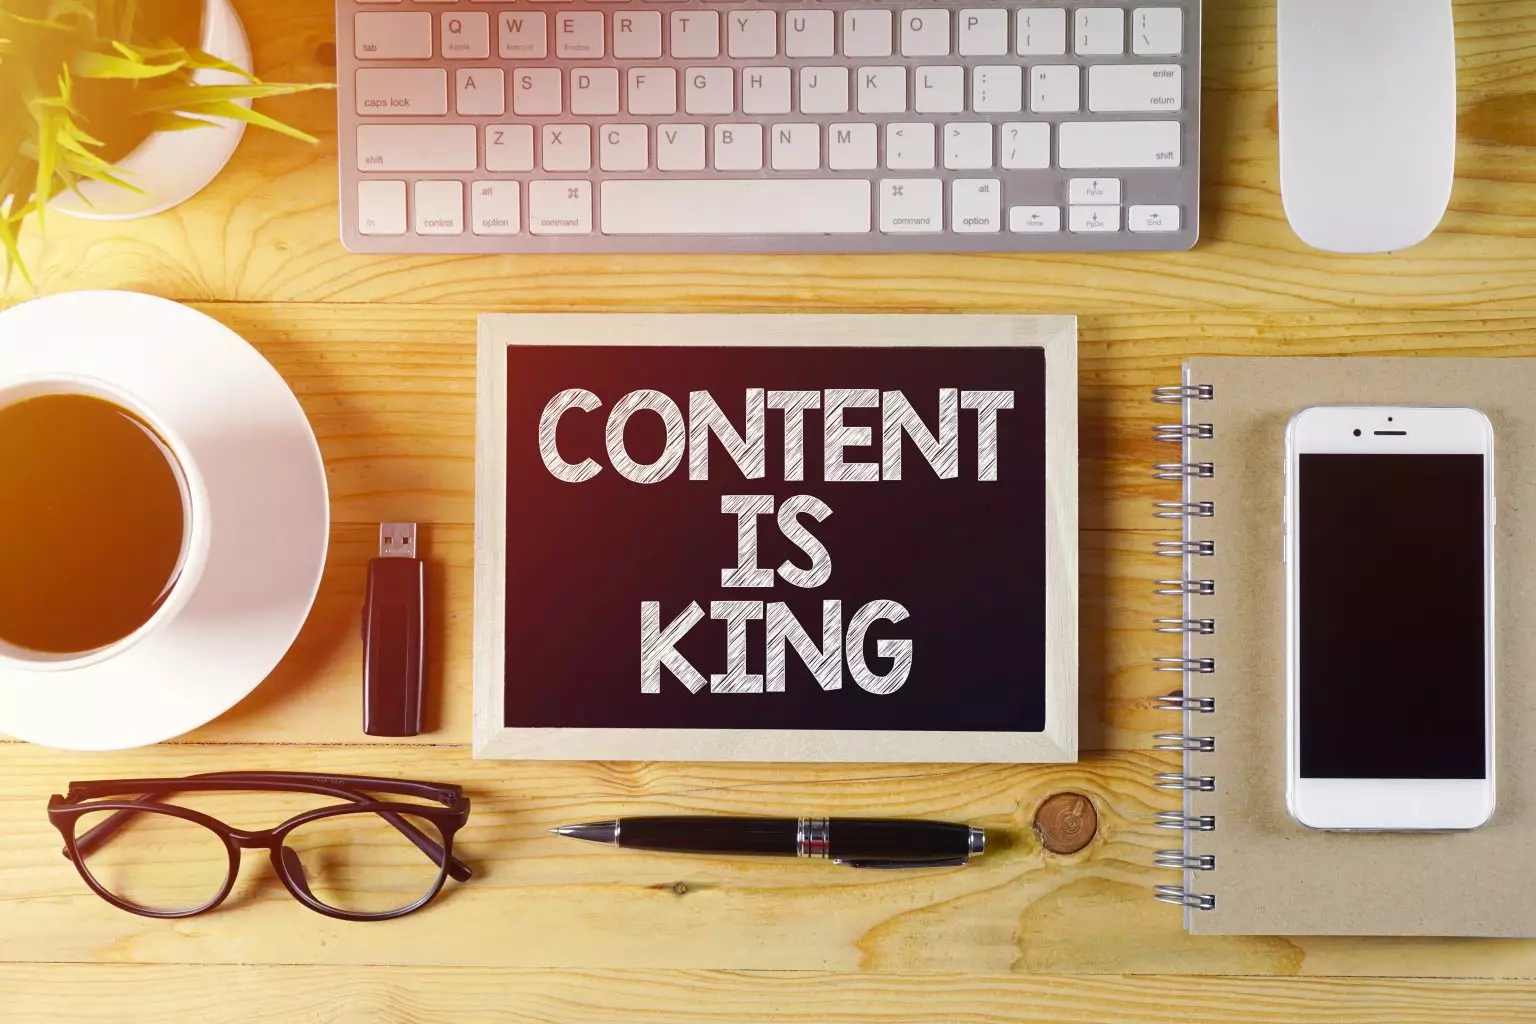 Crafting Compelling Content _ The Heart of Digital Marketing